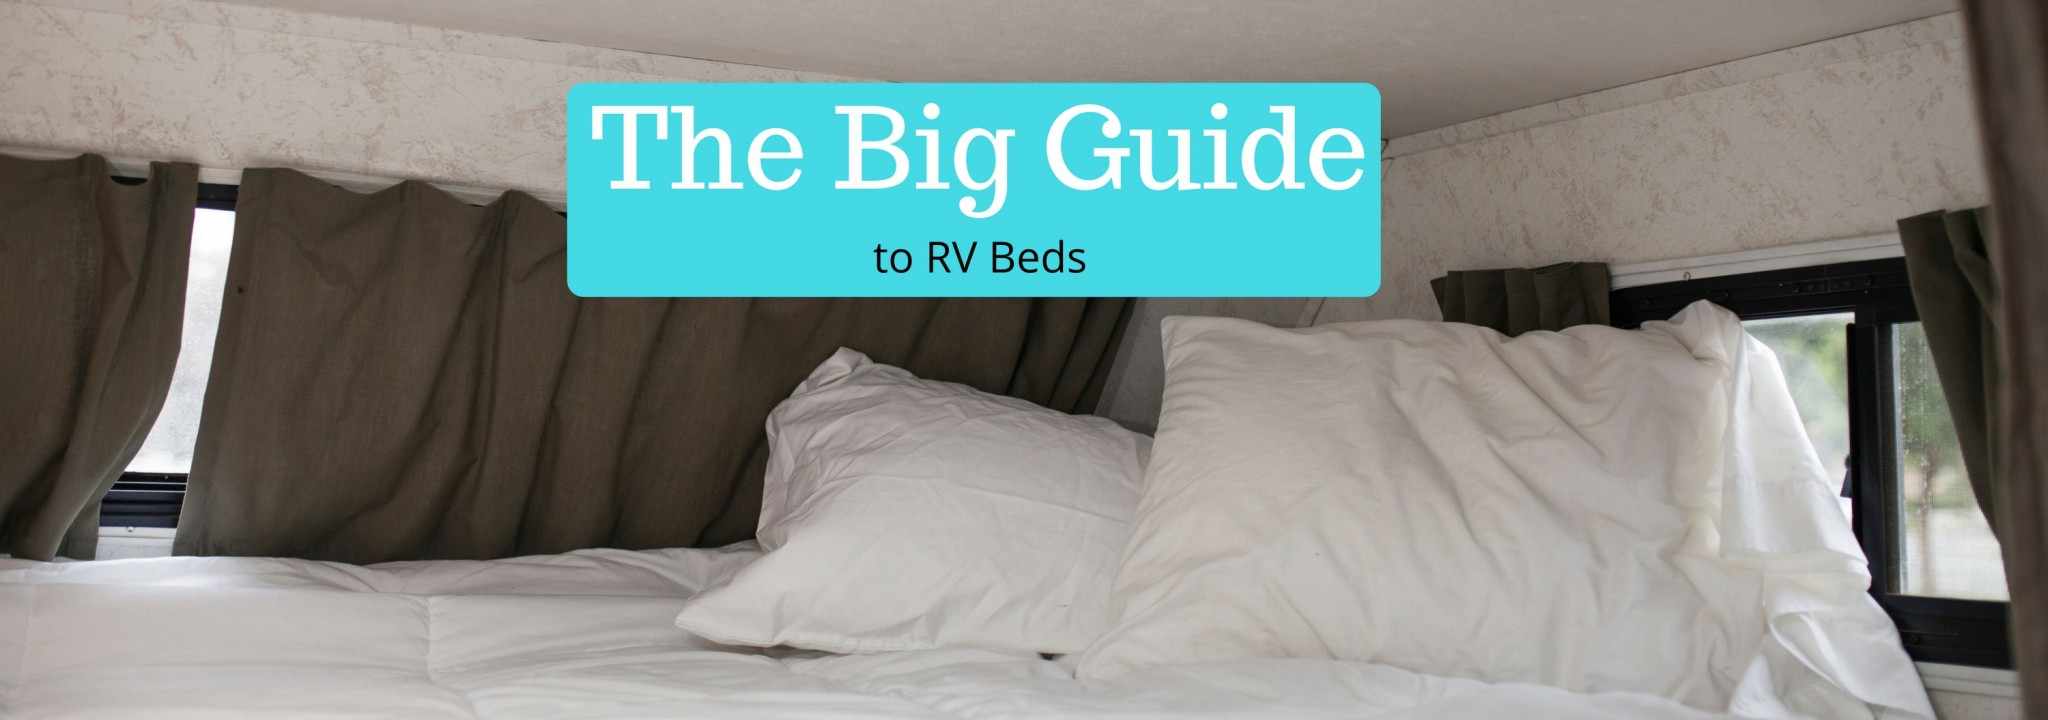 The Big Guide to RV Beds